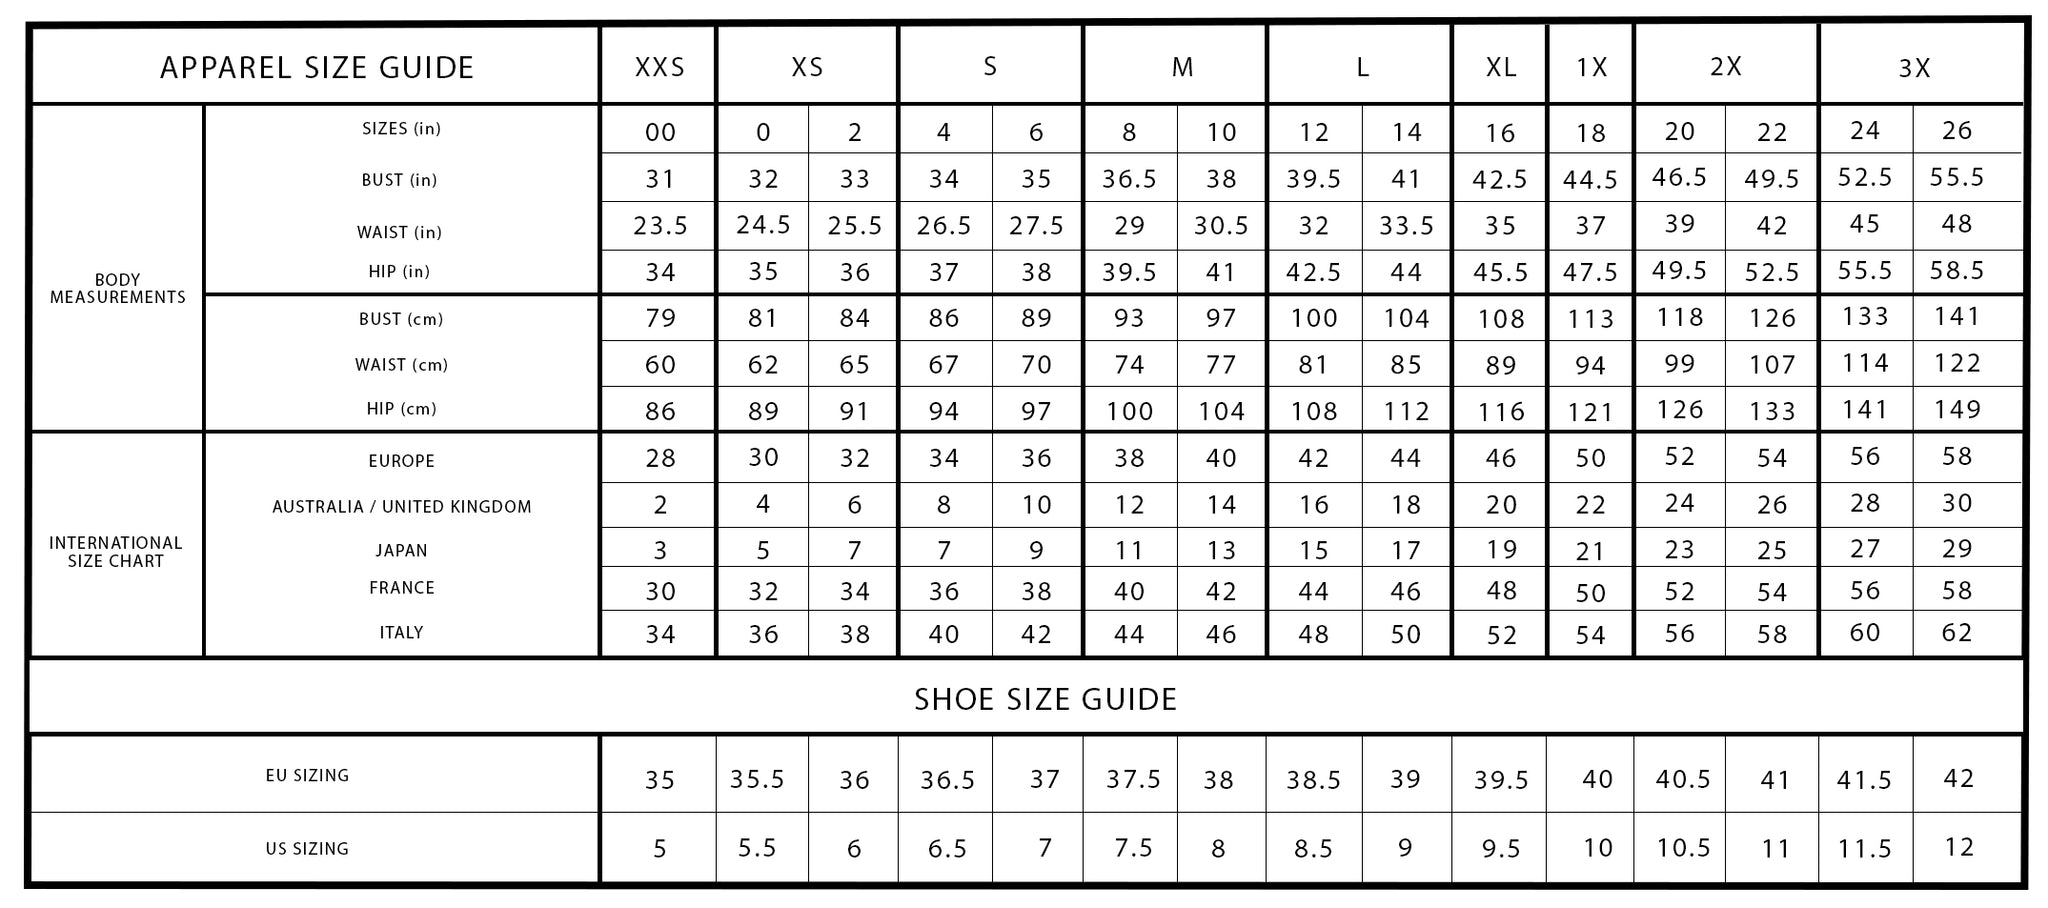 Shoe Size Chart With Conversions For US, UK, EU, JPN, CN, MX, KOR, AUS/NZ,  MOD & How To Measure Foot Size 